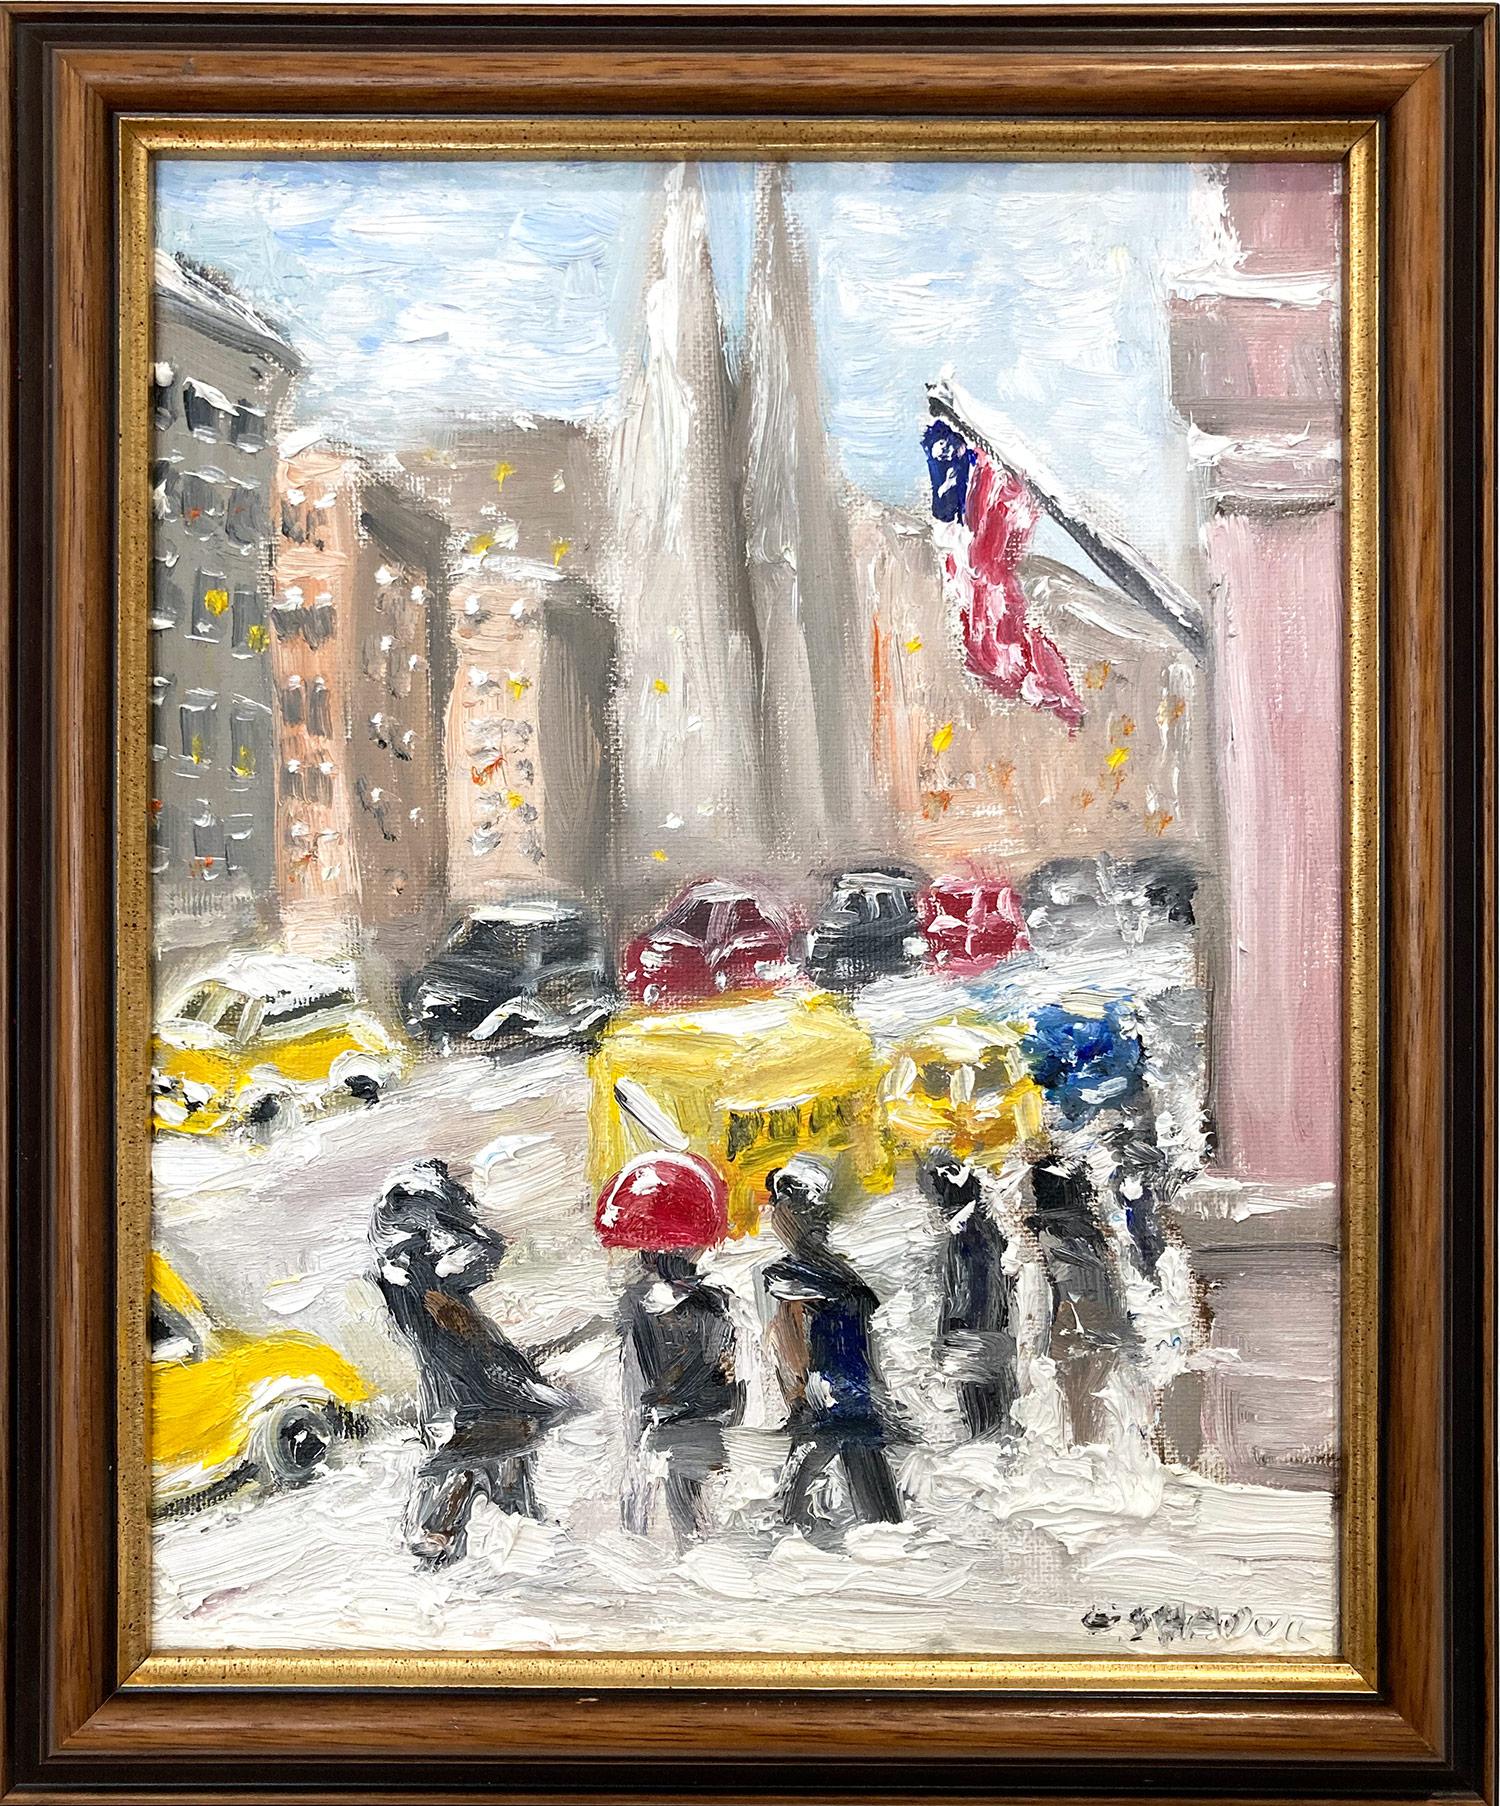 Cindy Shaoul Figurative Painting - "Snow on 5th" Impressionist Snow Oil Painting in Style of Guy Wiggins New York 